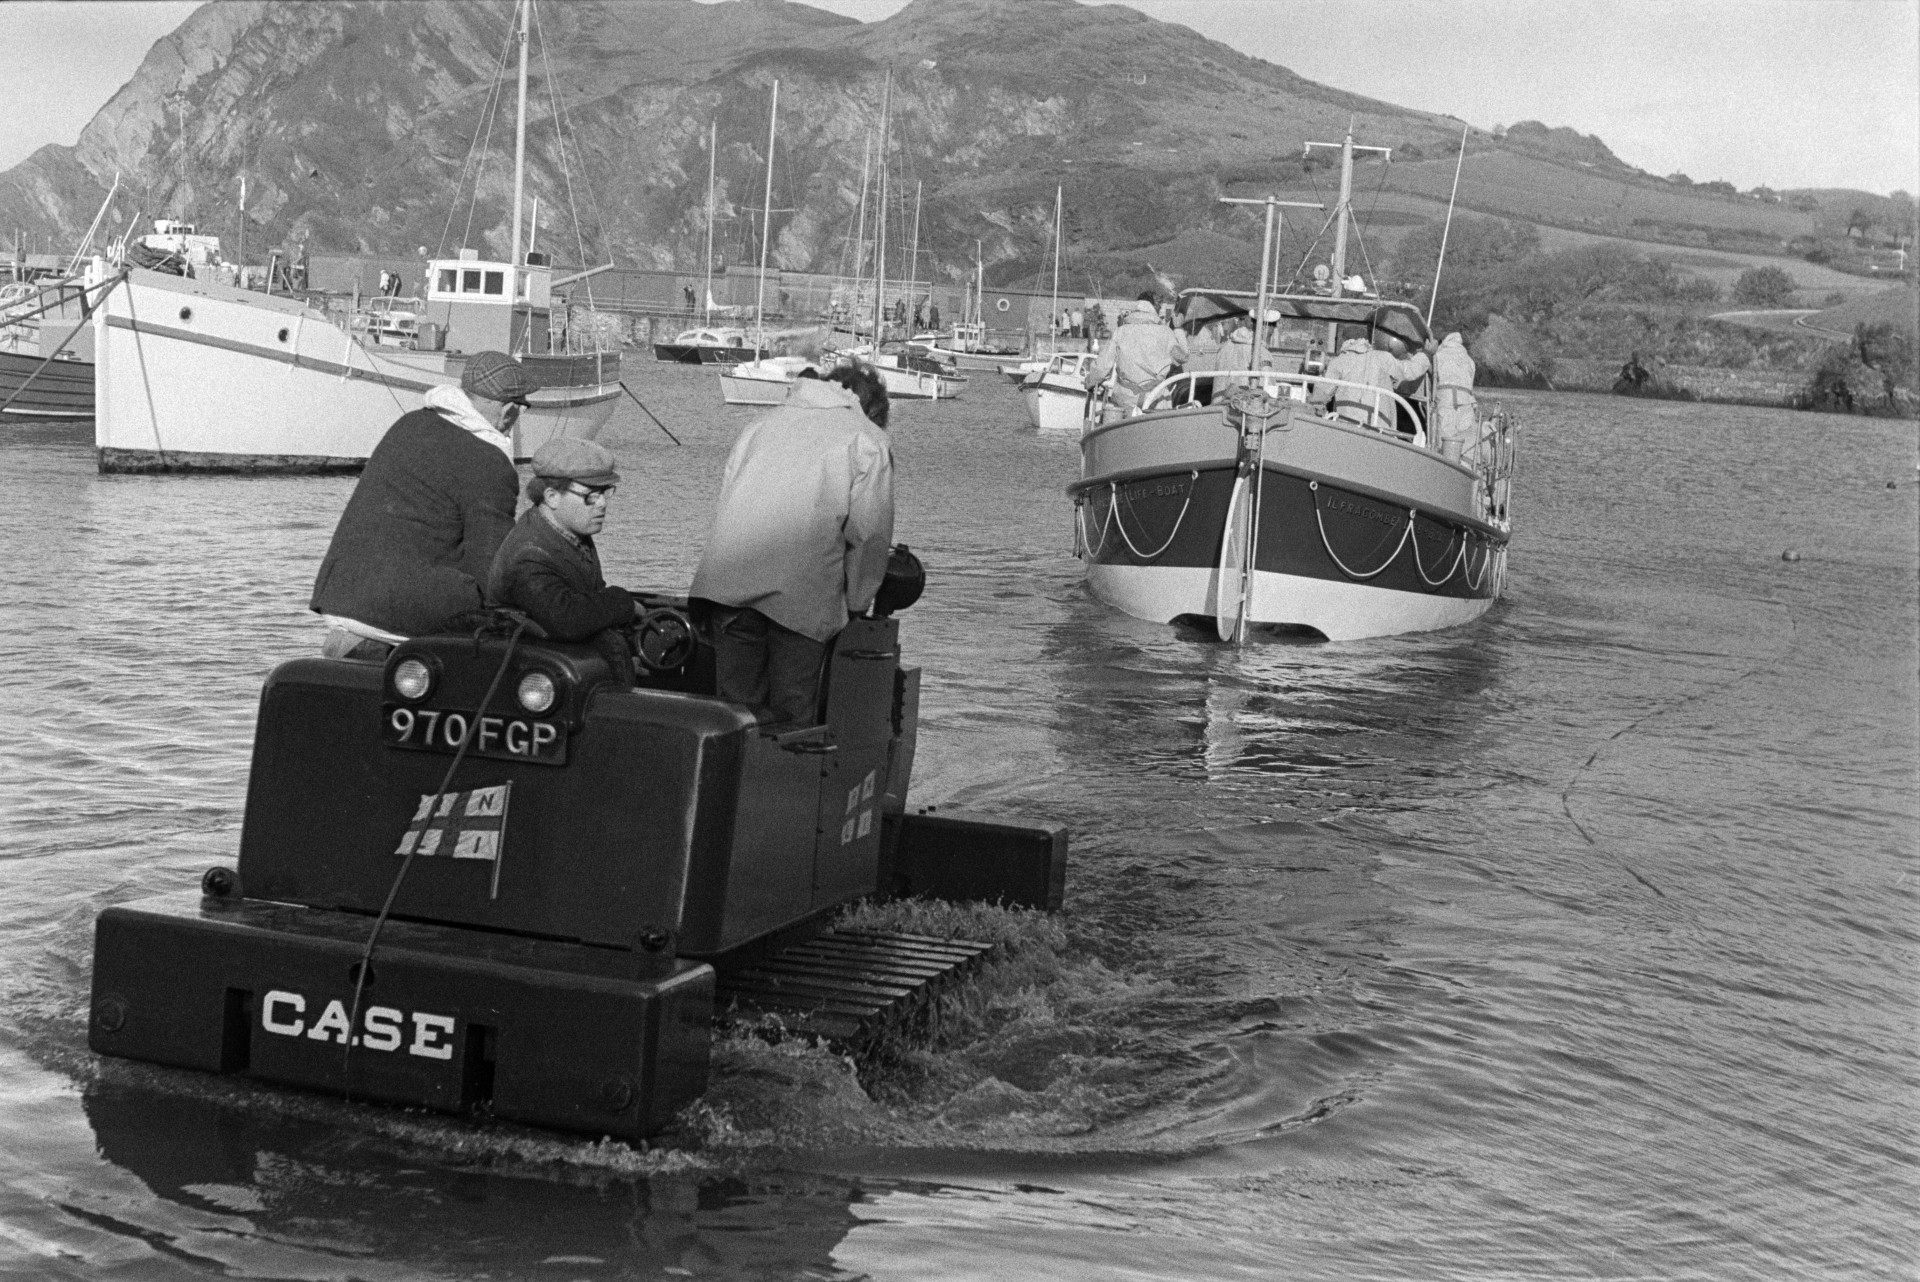 Men launching a life boat into the harbour at Ilfracombe, using a vehicle with caterpillar tracks. Other boats can be seen moored in the harbour.